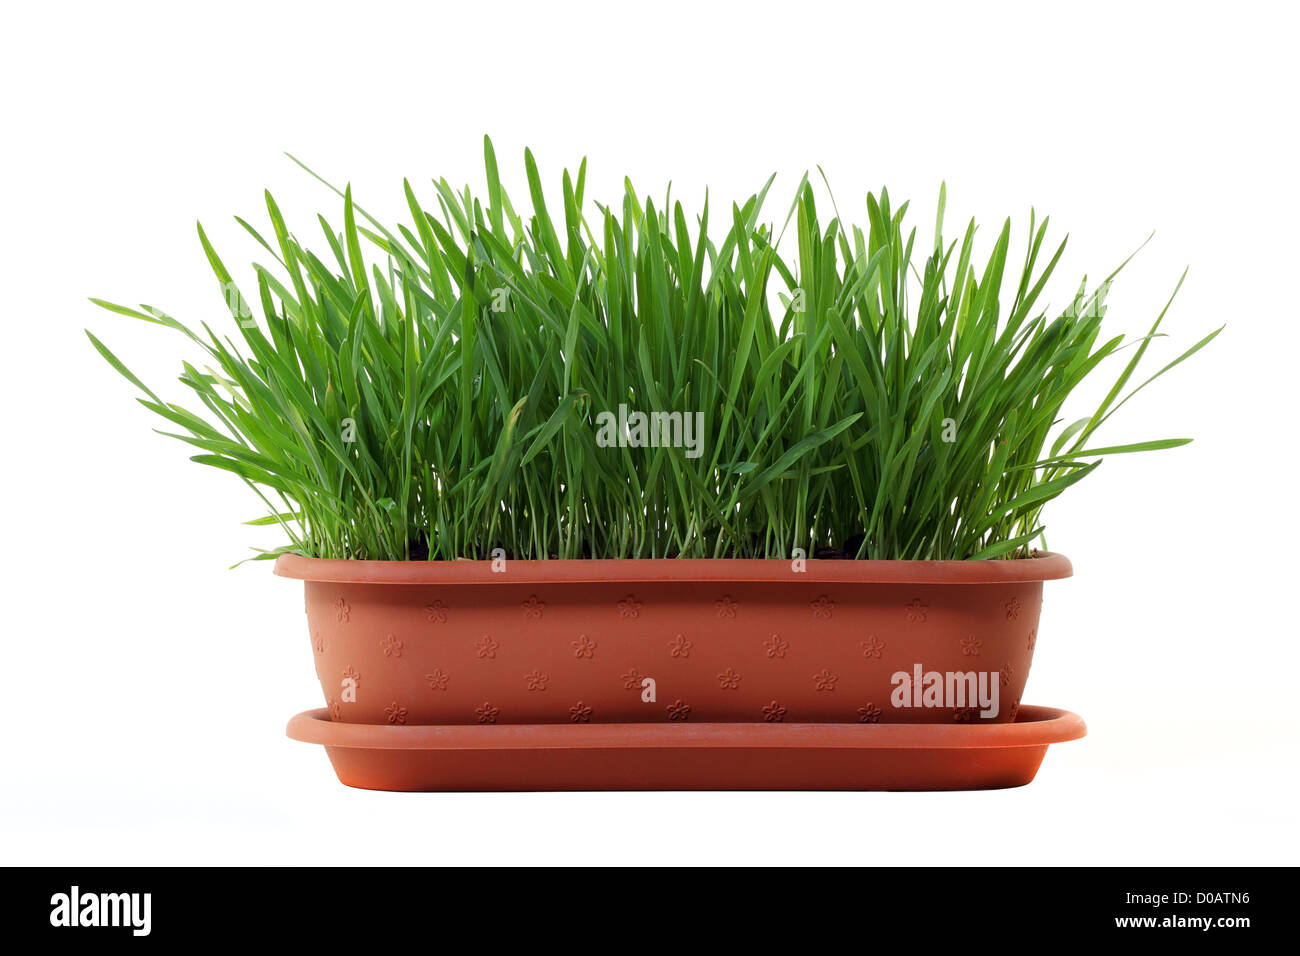 Green grass in a pot isolated on a white background Stock Photo